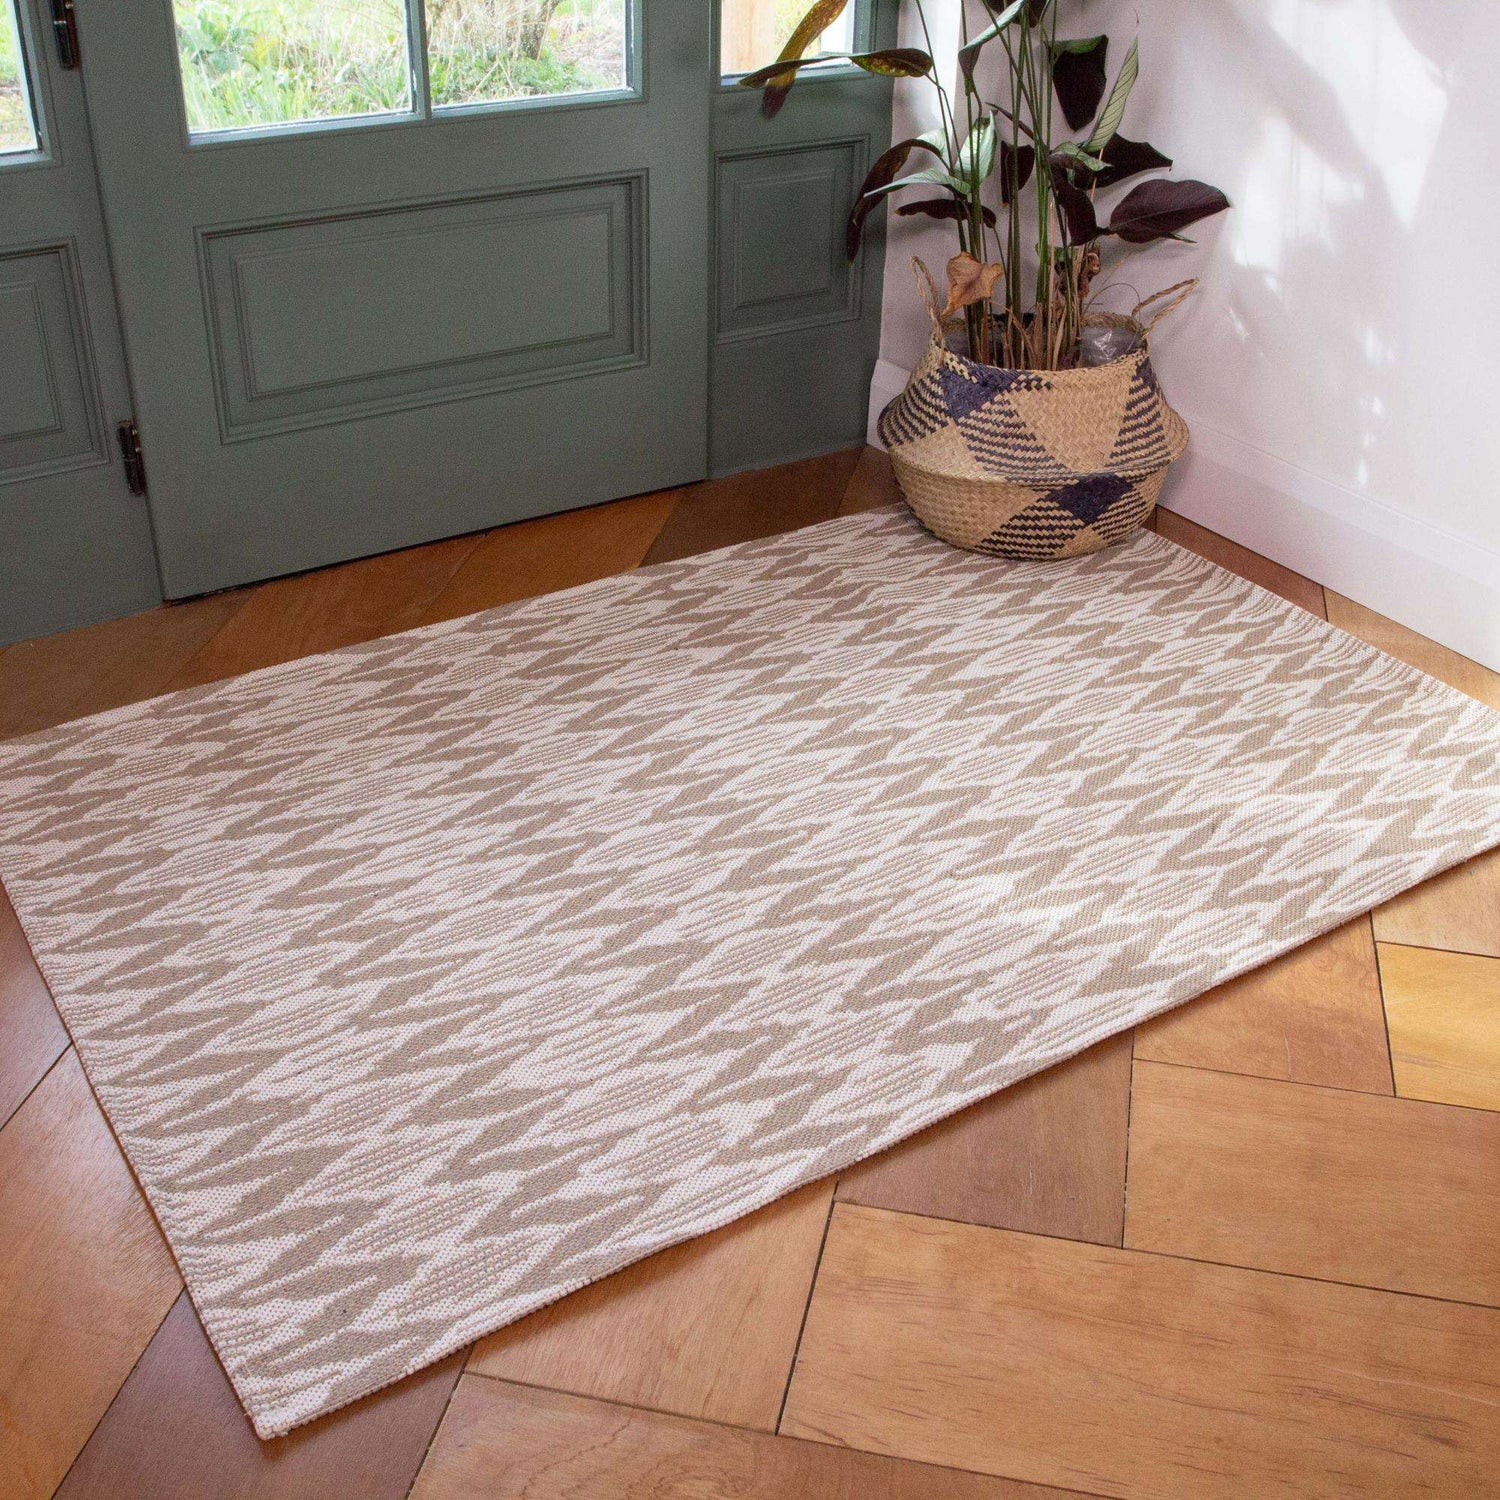 Natural Stripe Woven Runner Sustainable Recycled Cotton Rug